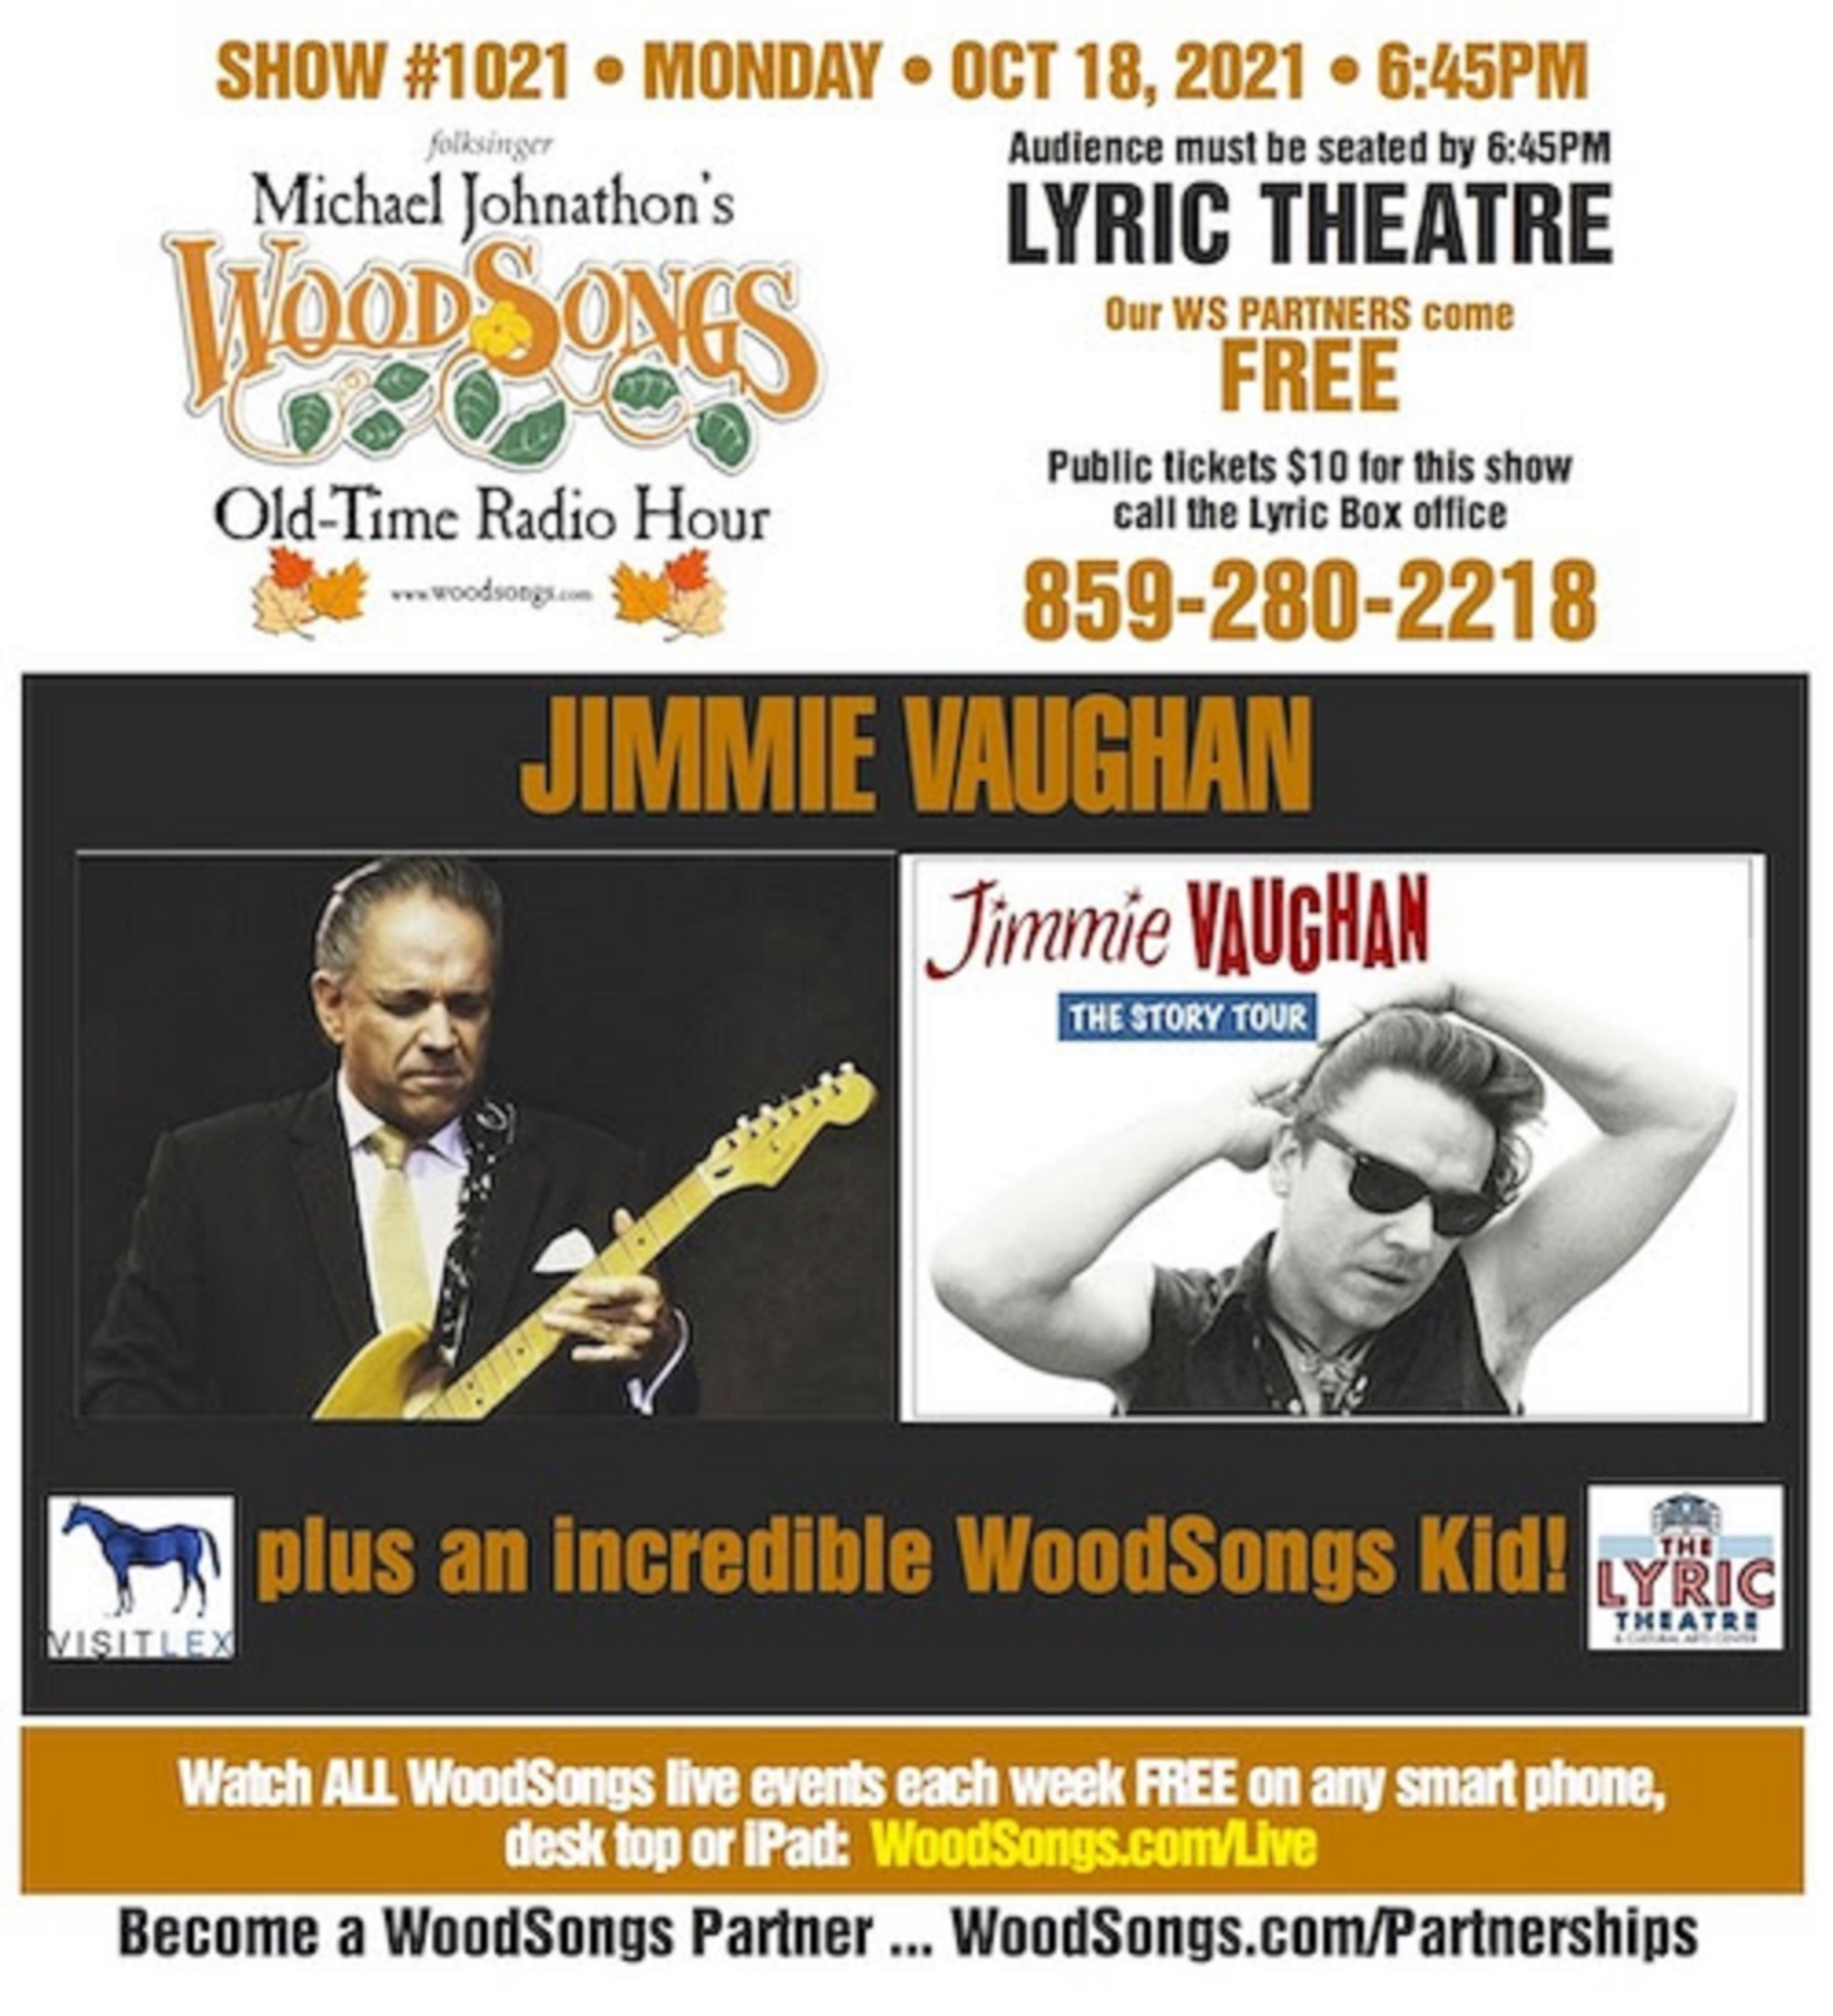 WoodSongs Welcomes Jimmie Vaughan, Becky Buller, Brei Carter, Jack Broadbent and More To The Historic Lyric Theatre